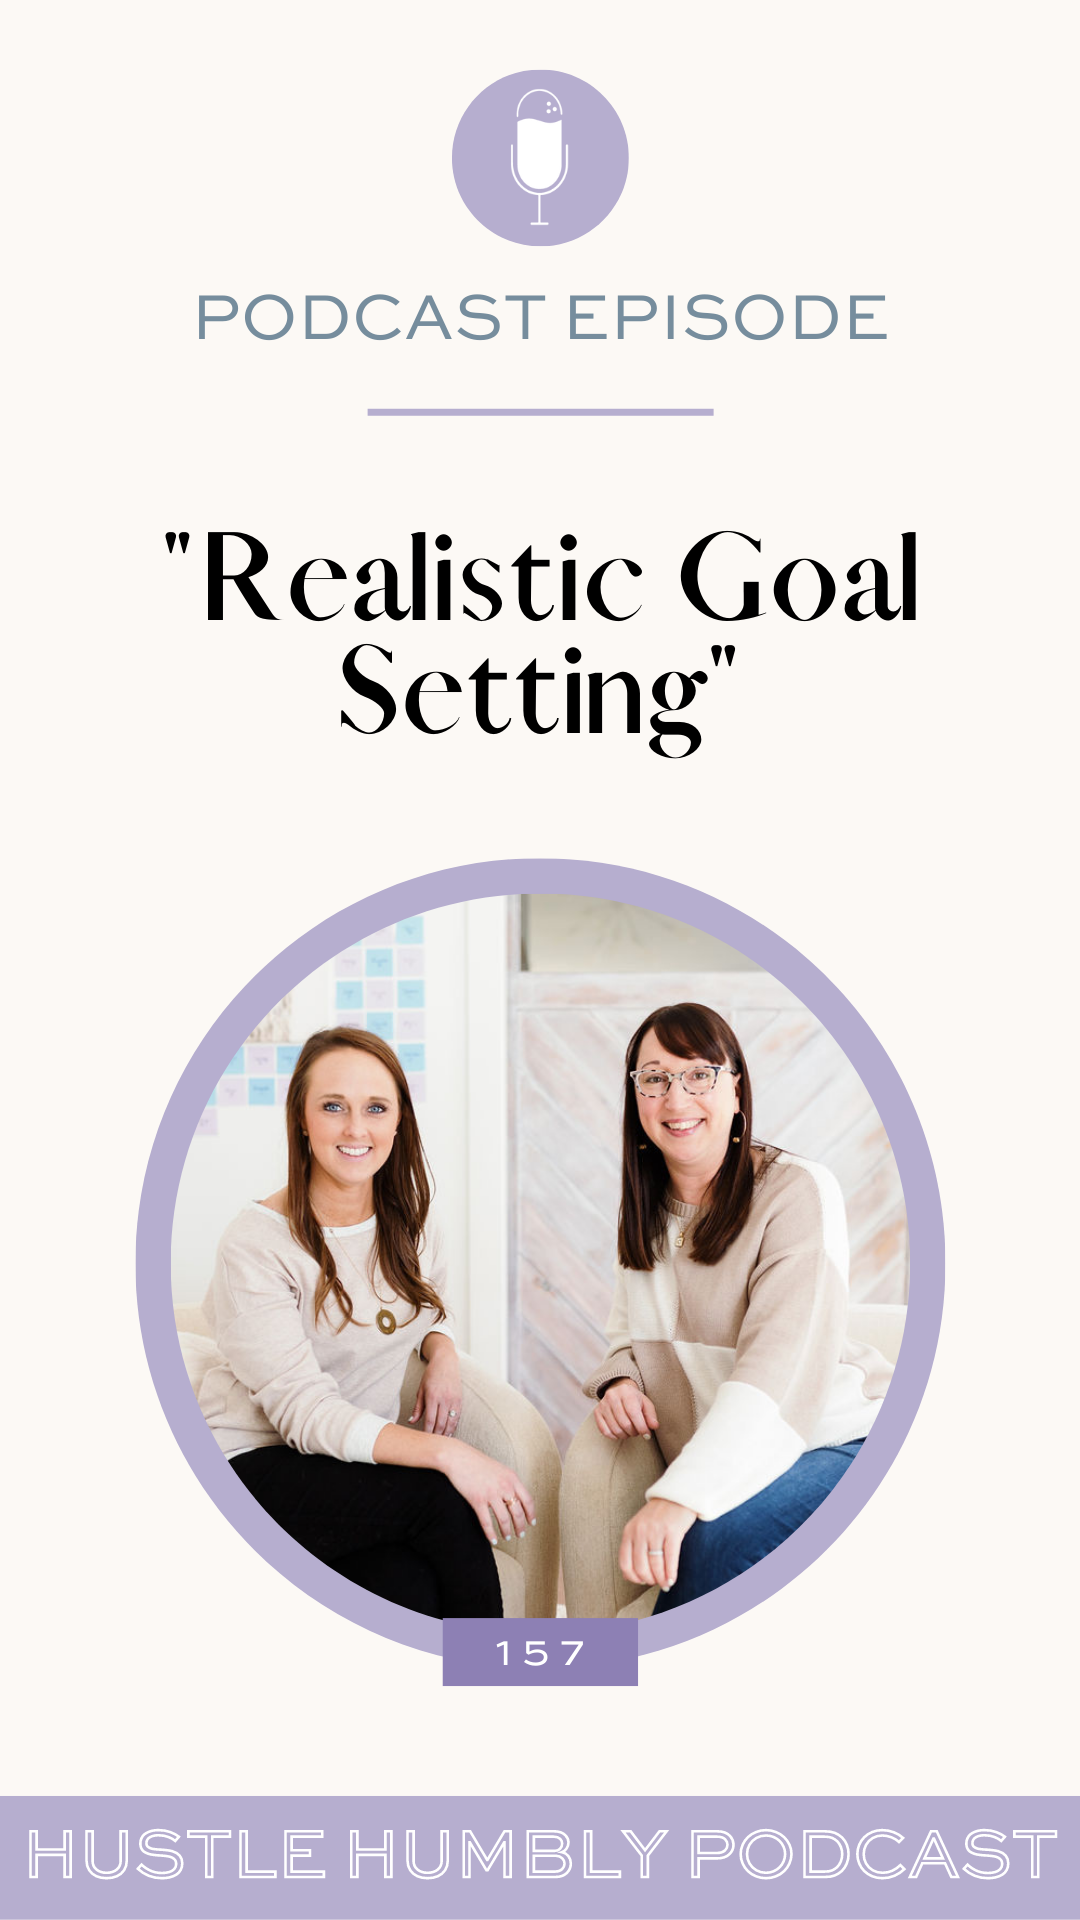 Hustle Humbly Podcast Episode 157: Realistic Goal Setting